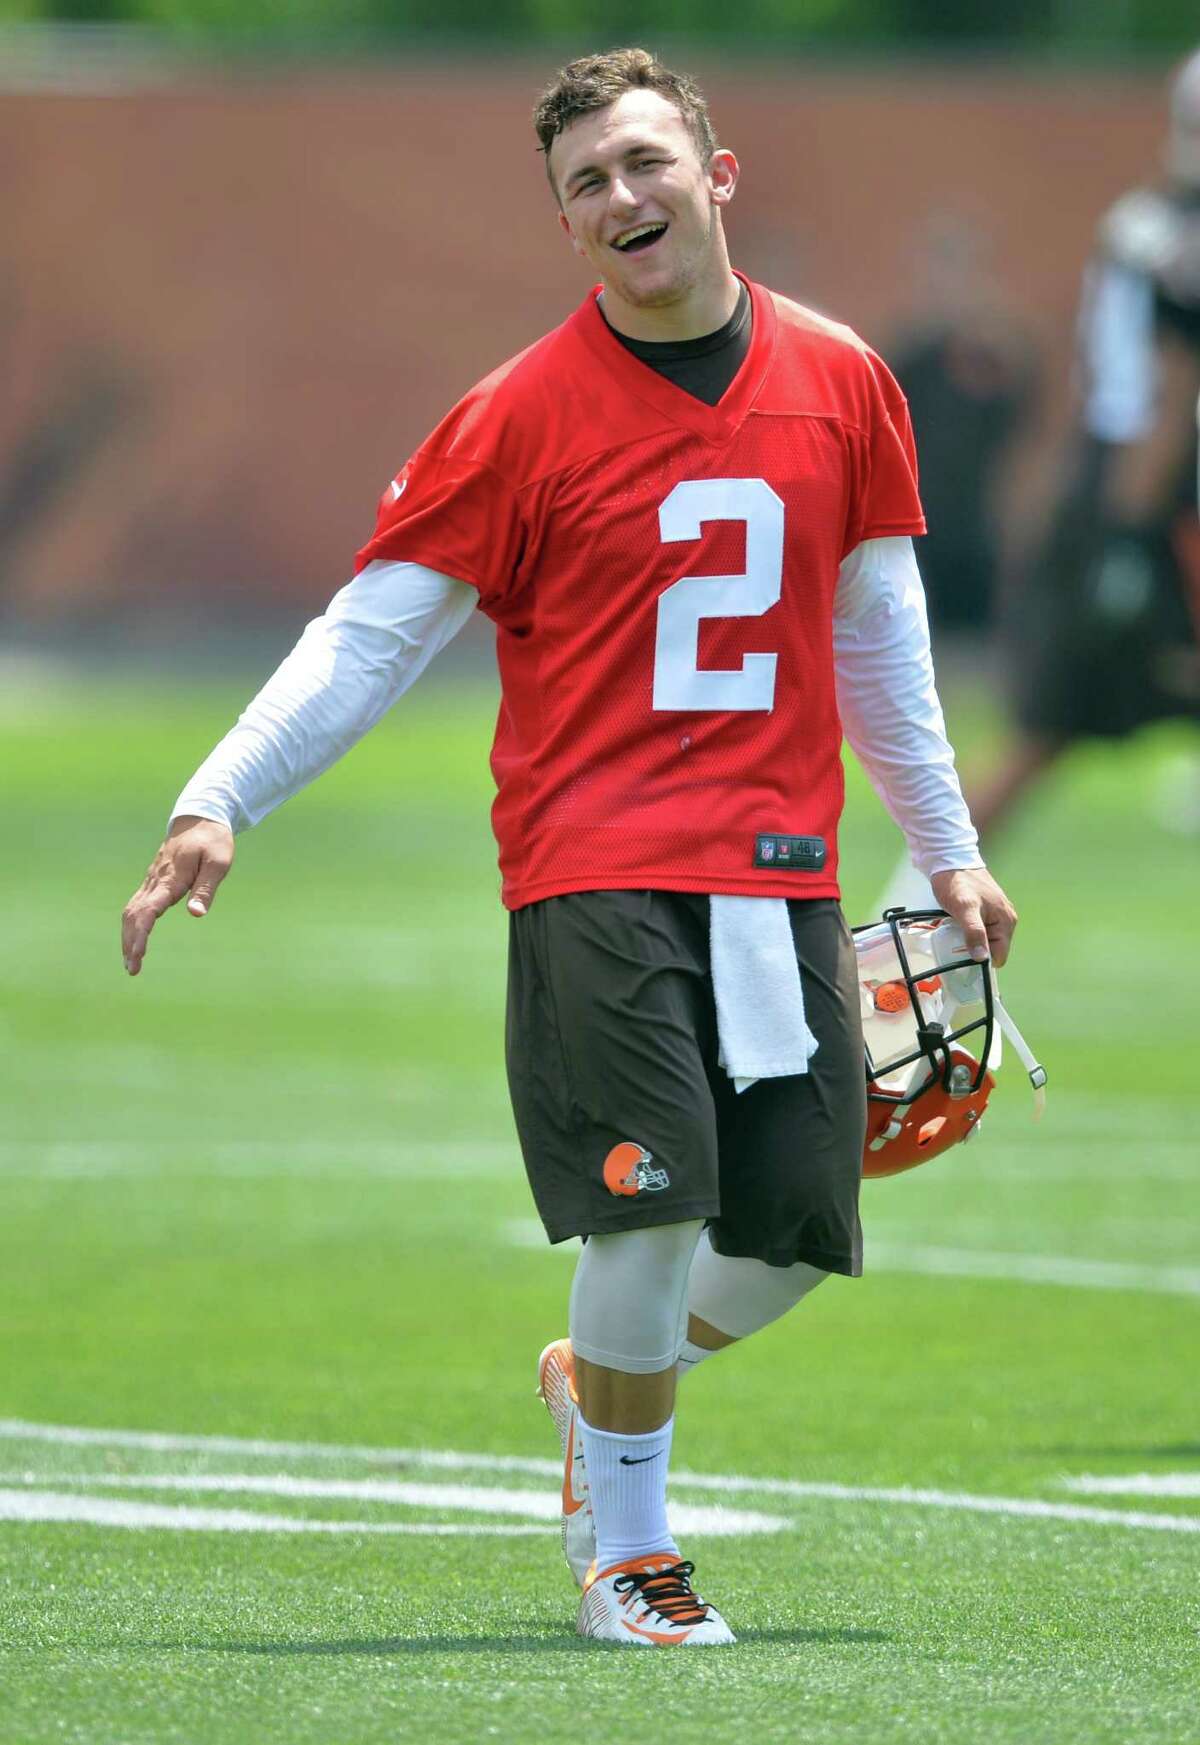 Cleveland Browns quarterback Johnny Manziel laughs as he comes off the field during minicamp in Berea, Ohio, Tuesday, June 16, 2015.